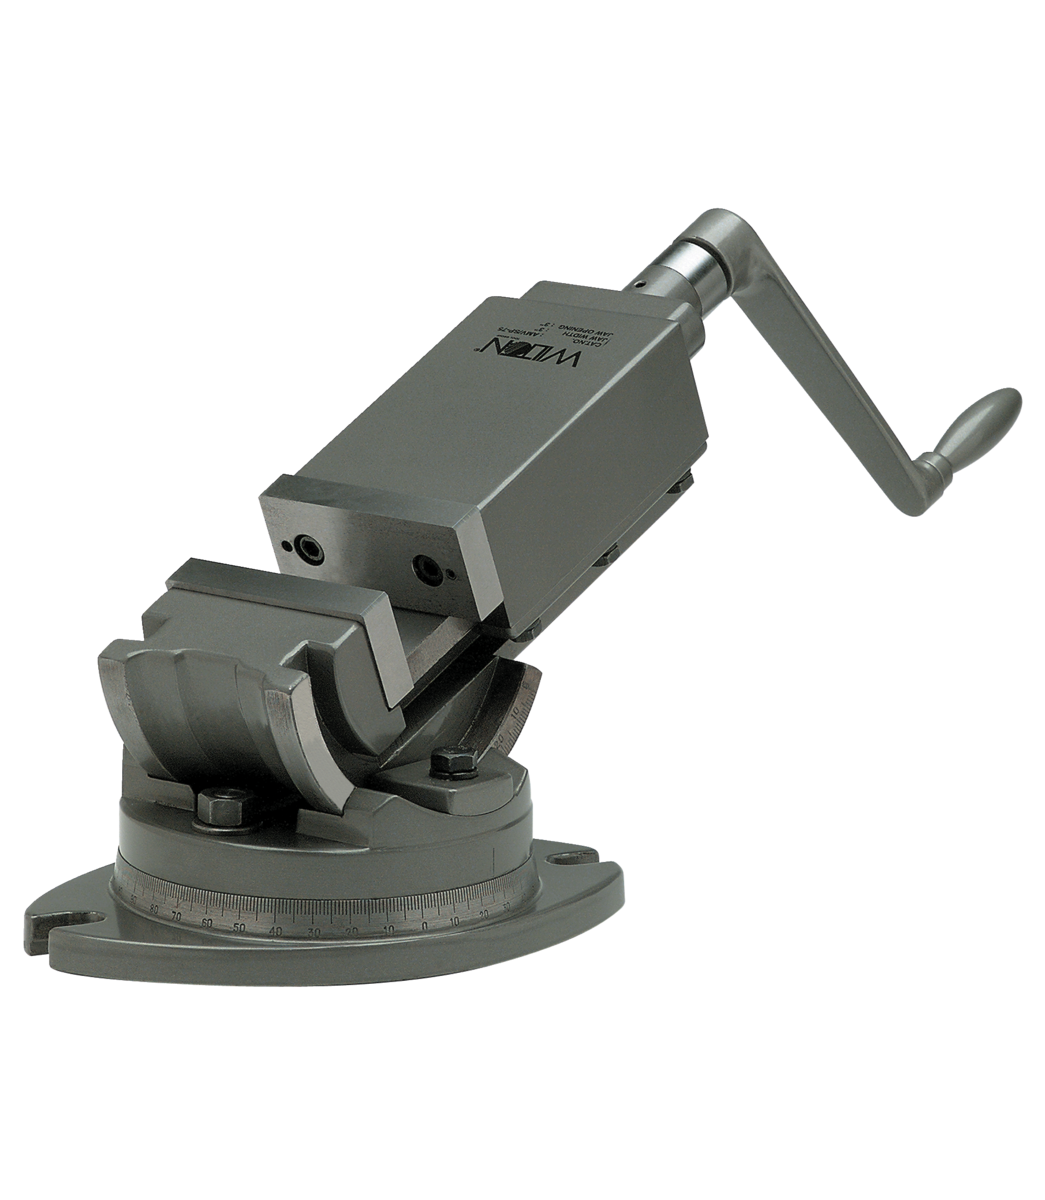 AMV/SP-100, 2-Axis Precision Angular Vise 4" Jaw Width, 1-1/2” Jaw Depth